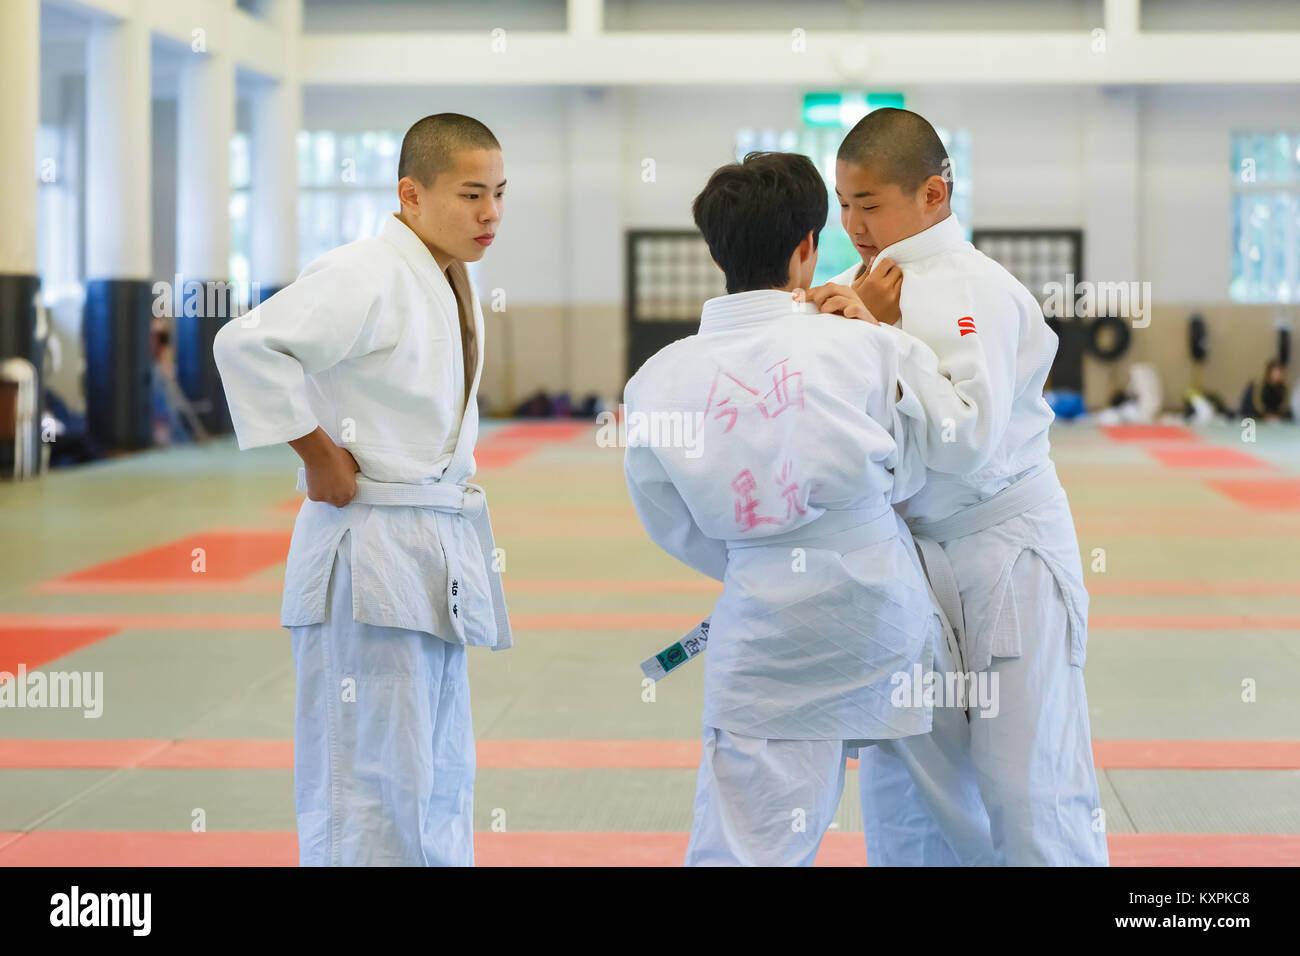 OSAKA, JAPAN - OCTOBER 25: Shudokan Hall in Osaka, Japan on October 25, 2014. Unidentified Japanese students attend the Judo class which is a traditio Stock Photo